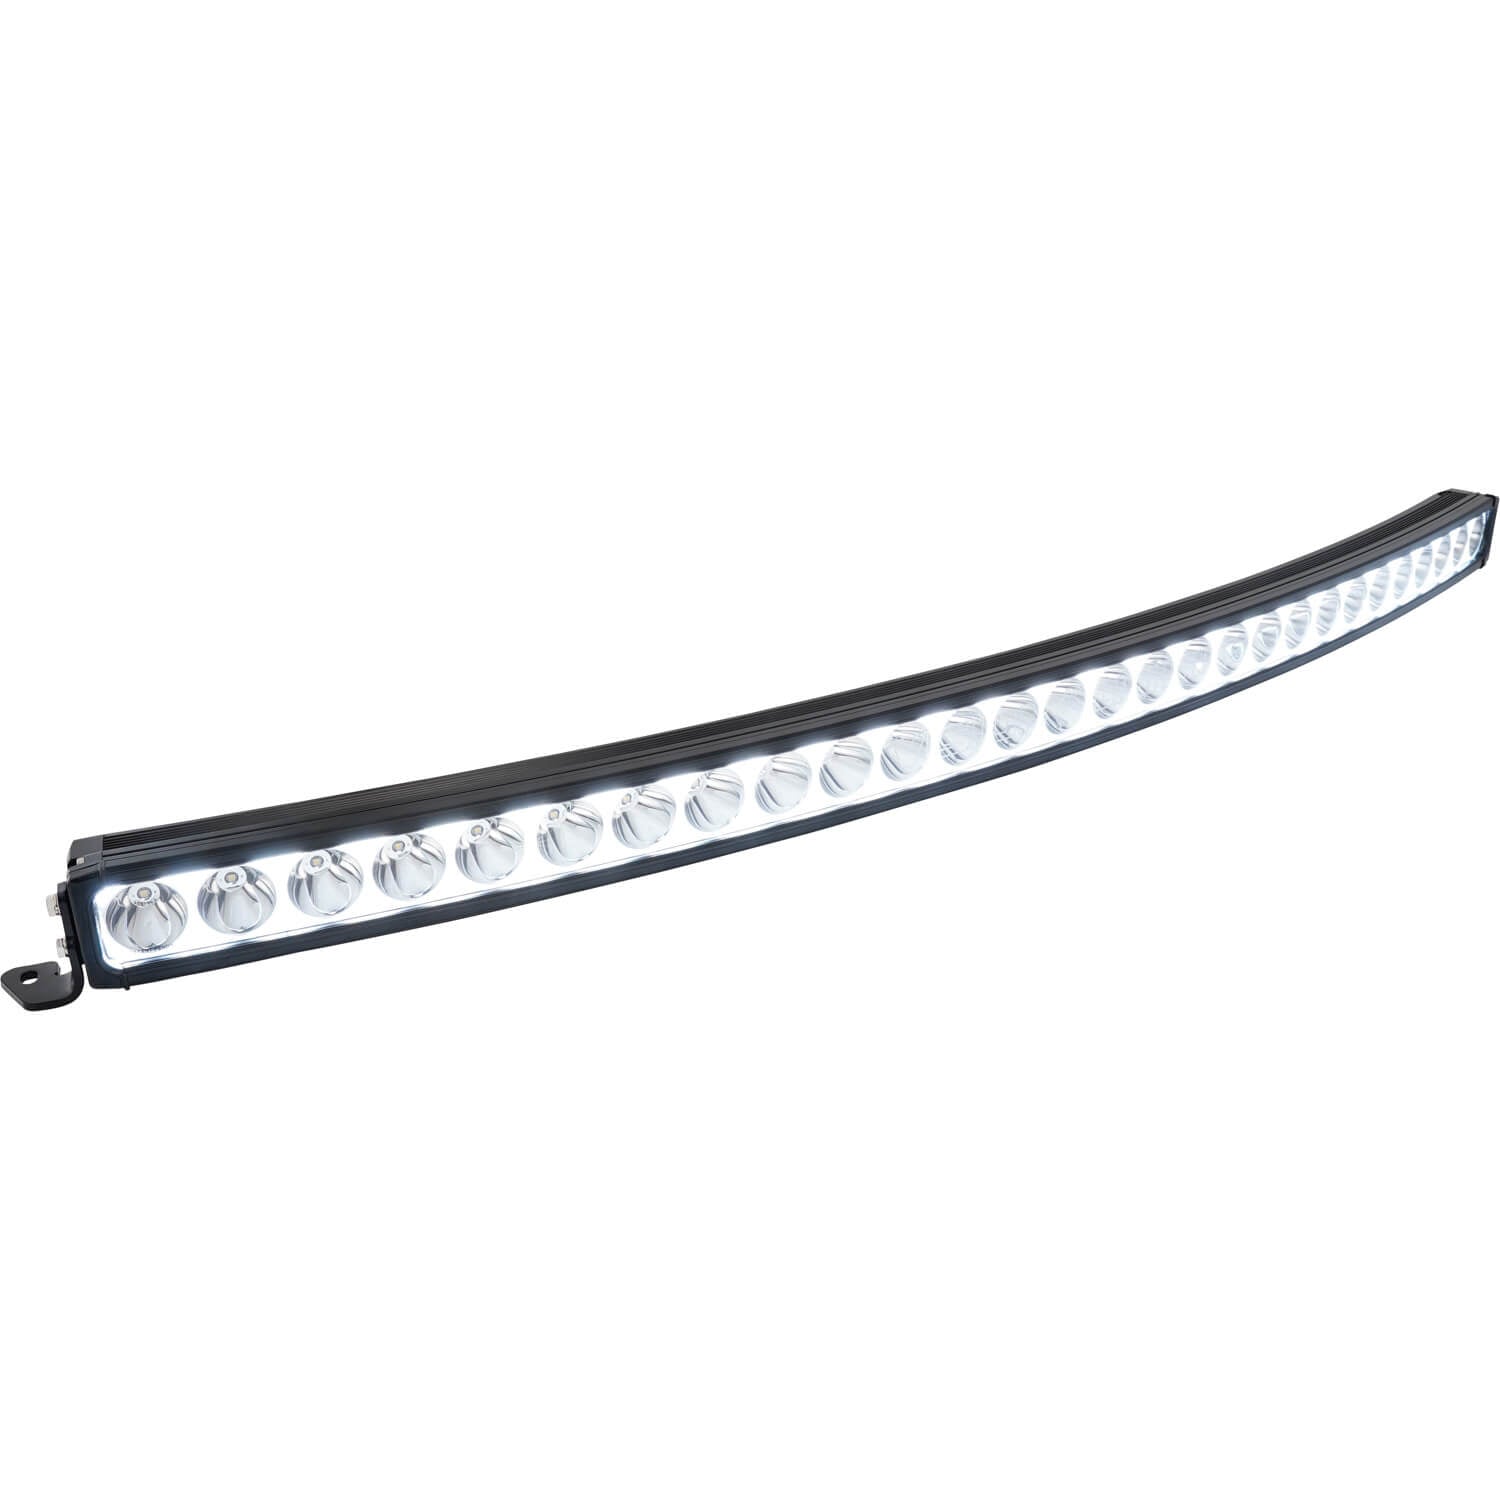 50 XPR Curved Halo Light Bar – Vision X Off-Road